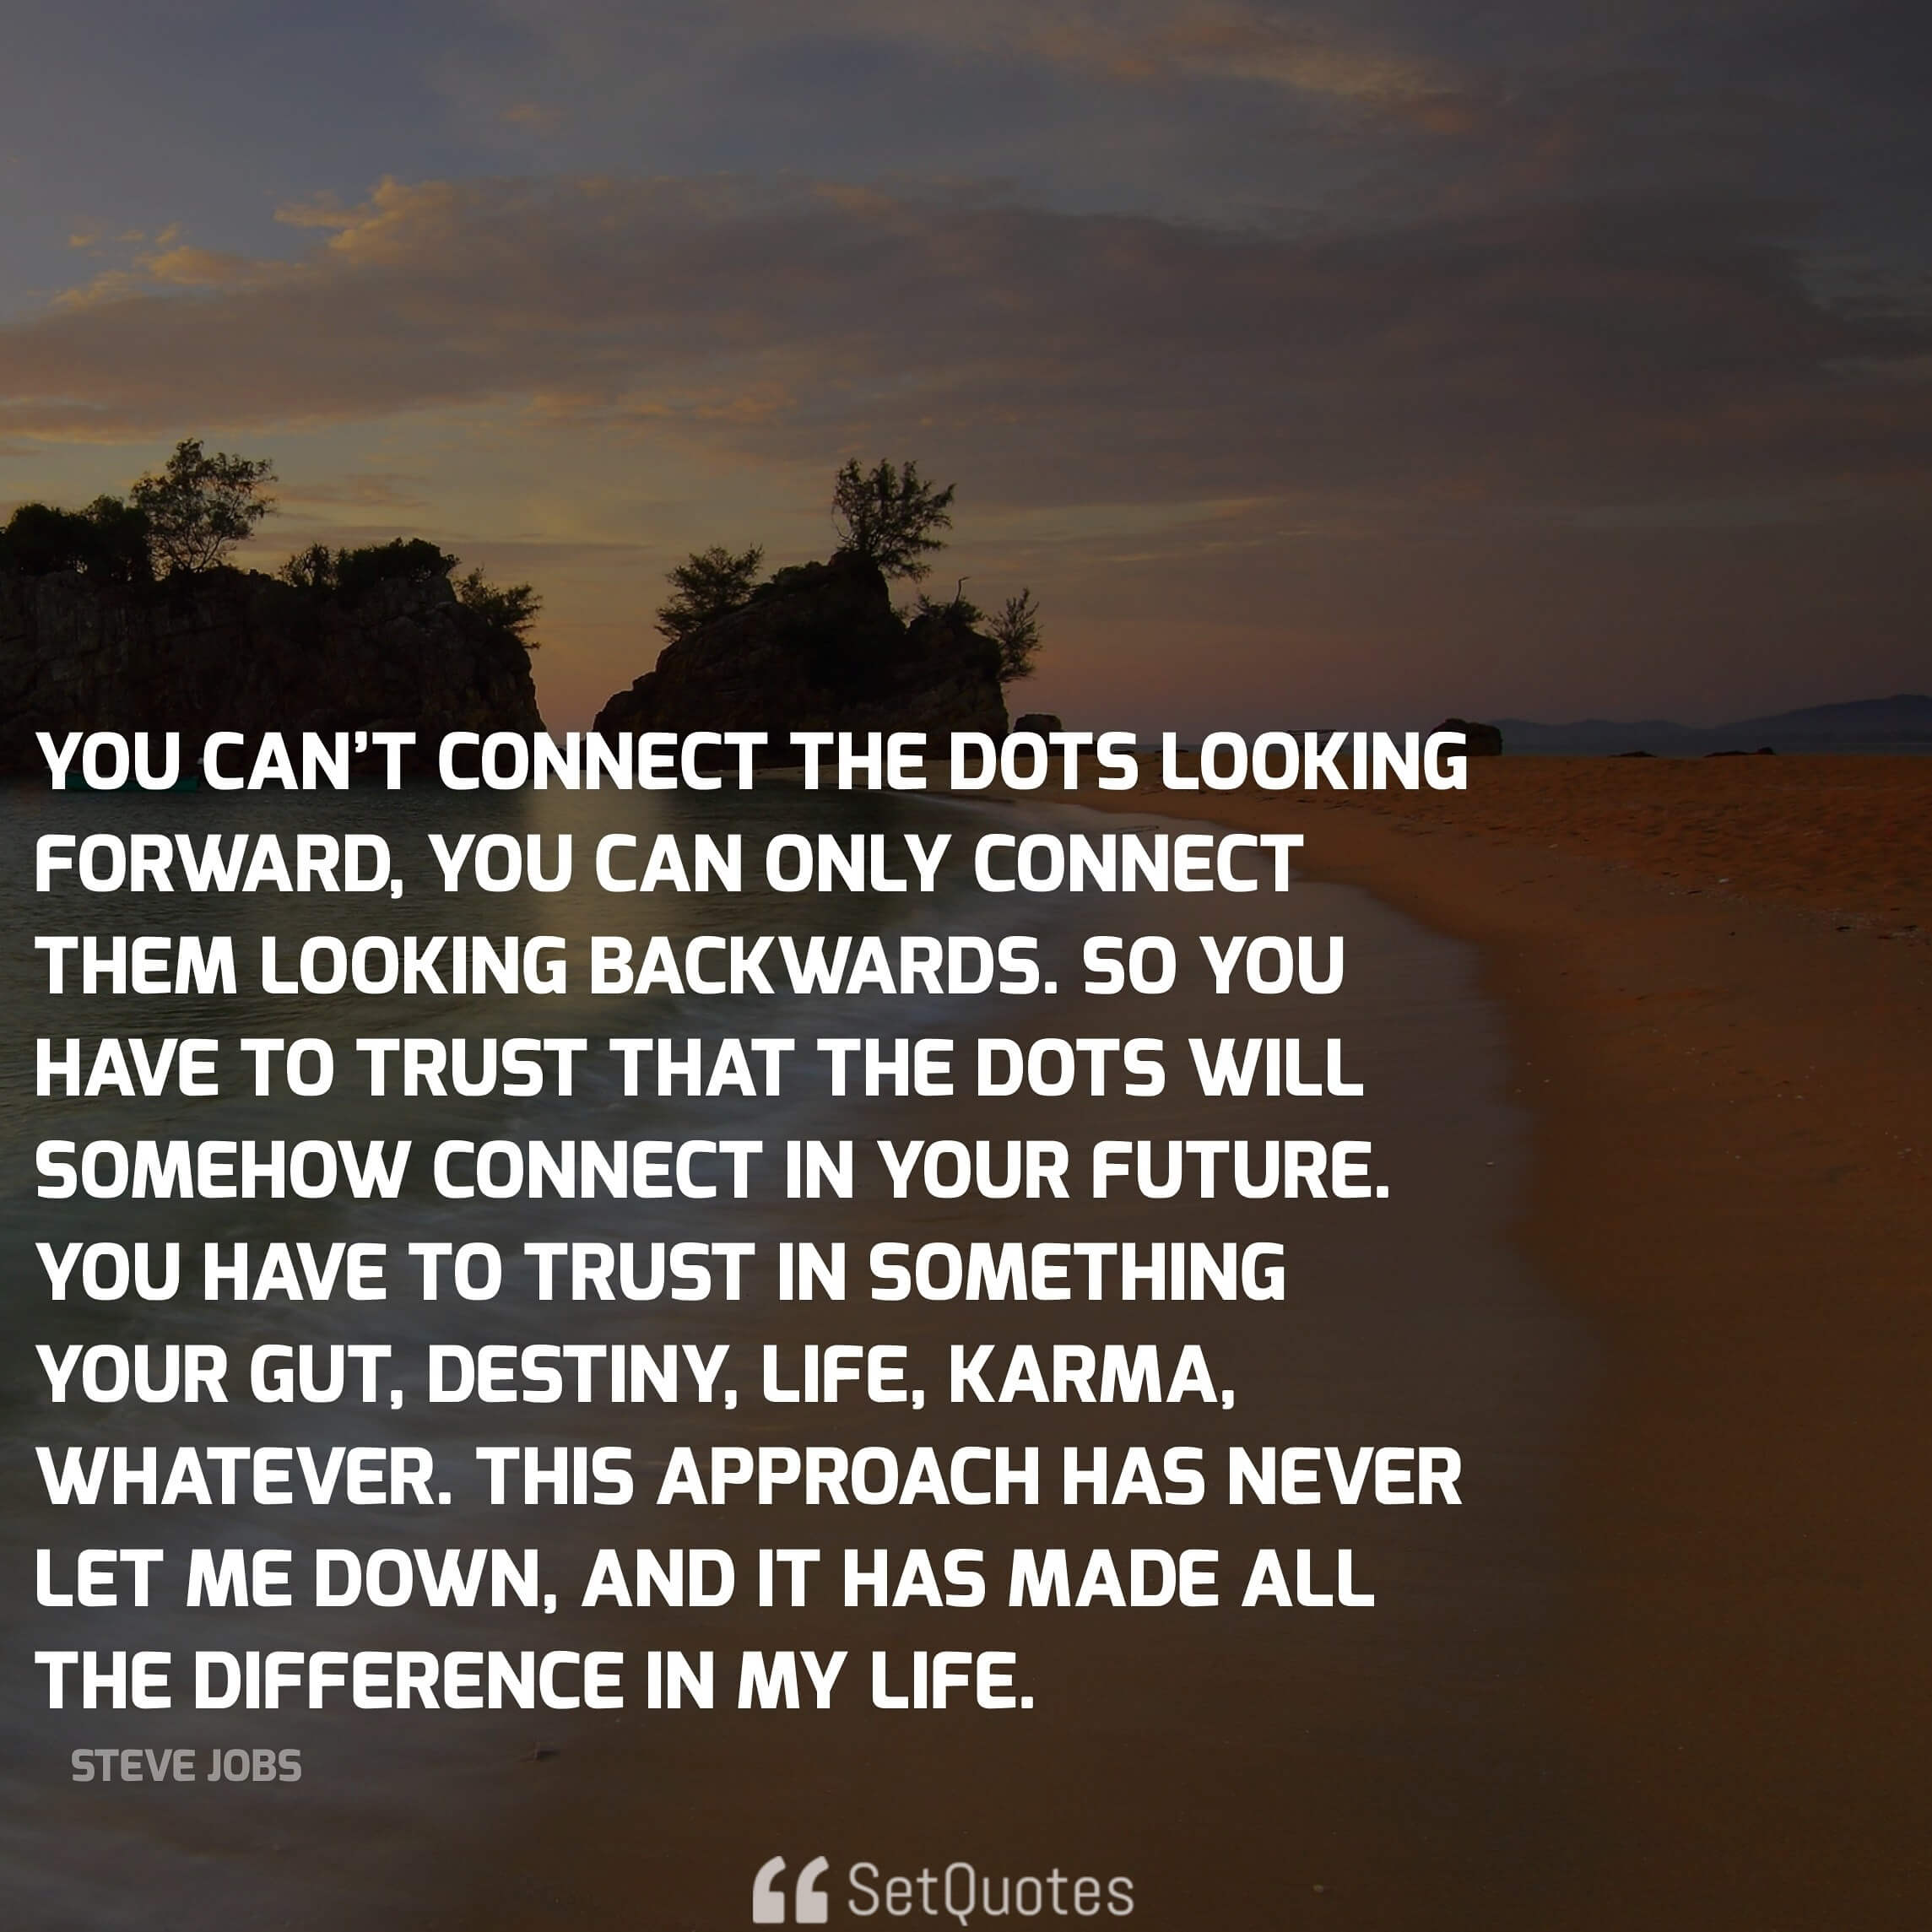 You can’t connect the dots looking forward; you can only connect them looking backwards. - steve jobs quotes